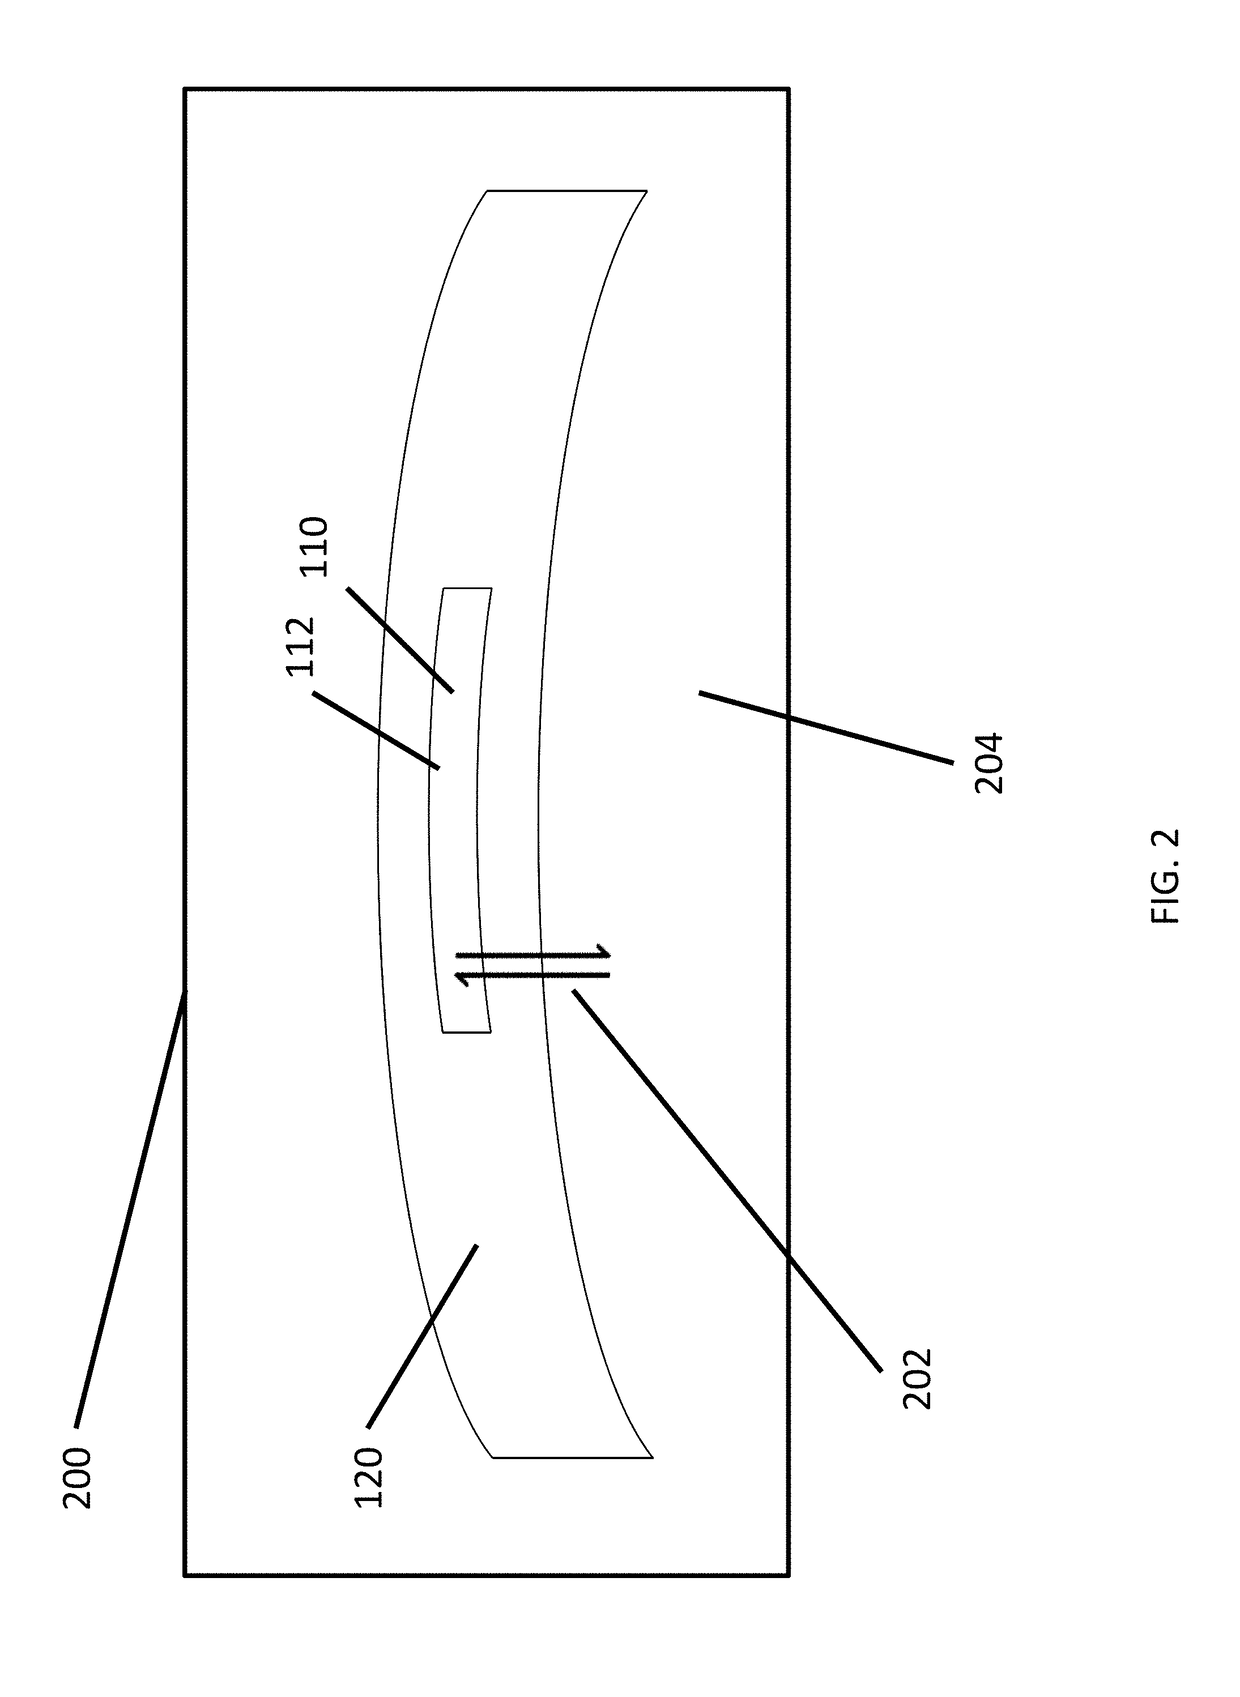 Accommodating lens with cavity